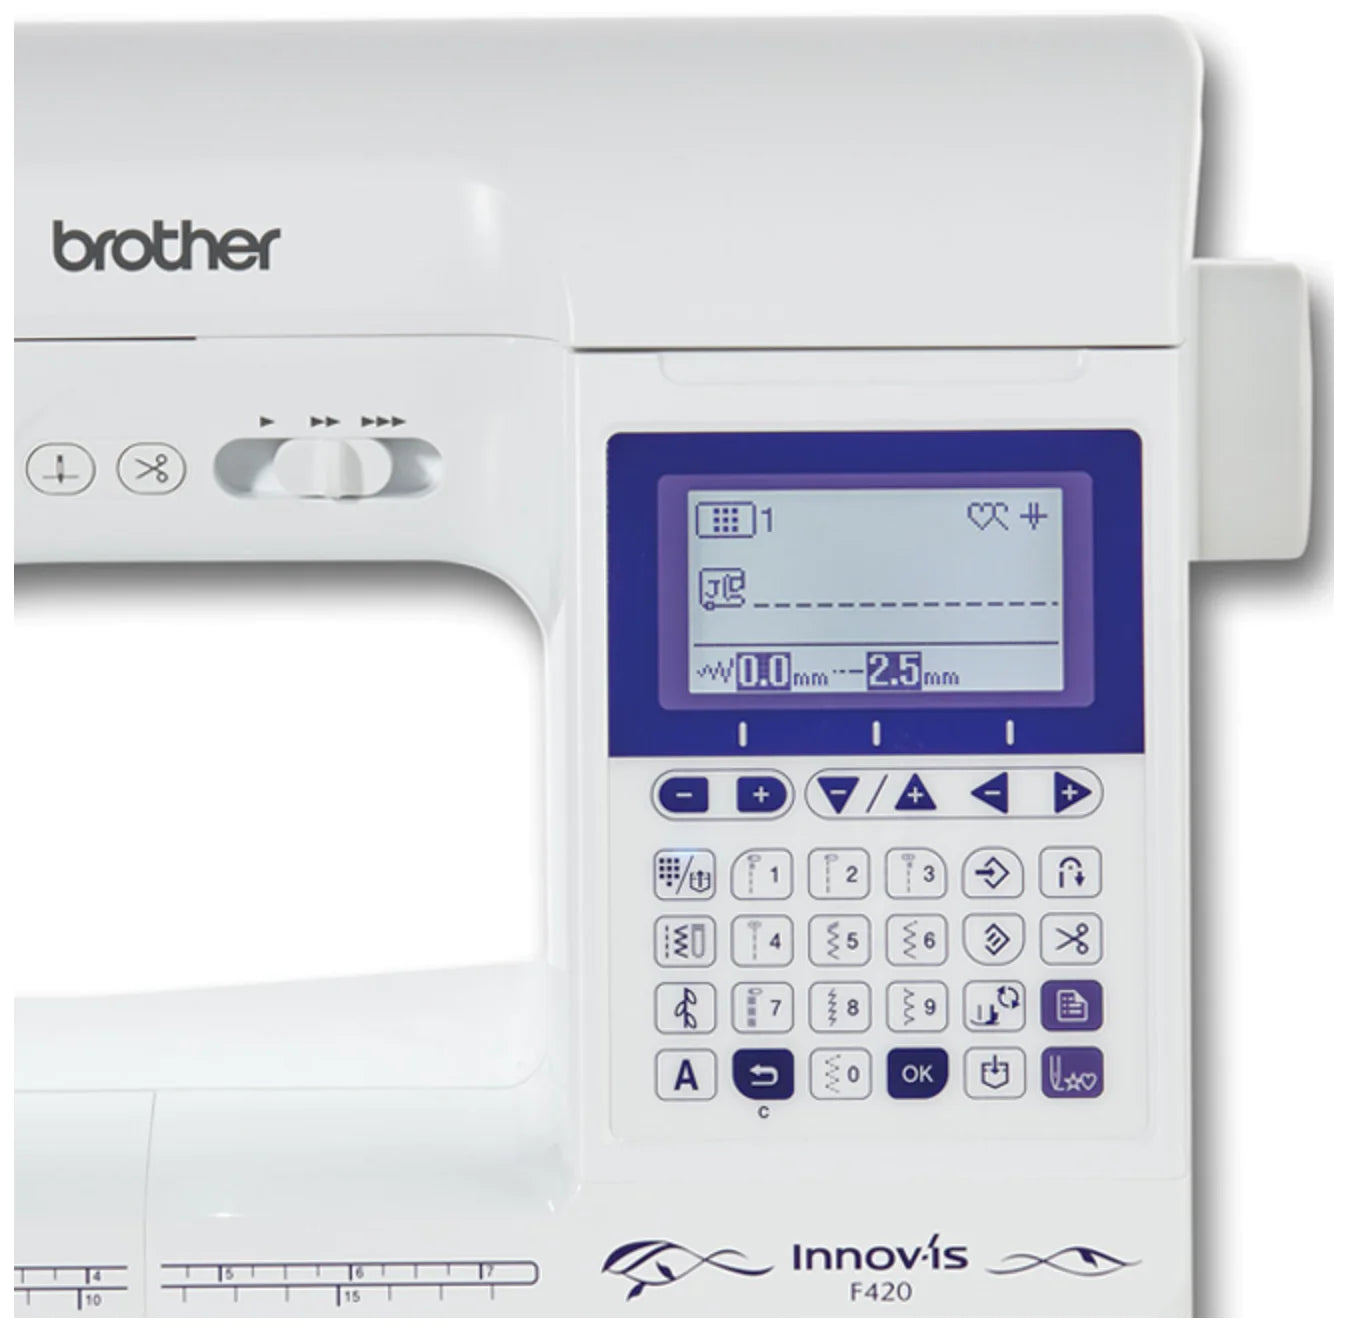 LCD display of the Brother Innov-is F420 sewing machine, featuring stitch options and settings on the user-friendly interface, with the machine’s model number visible.